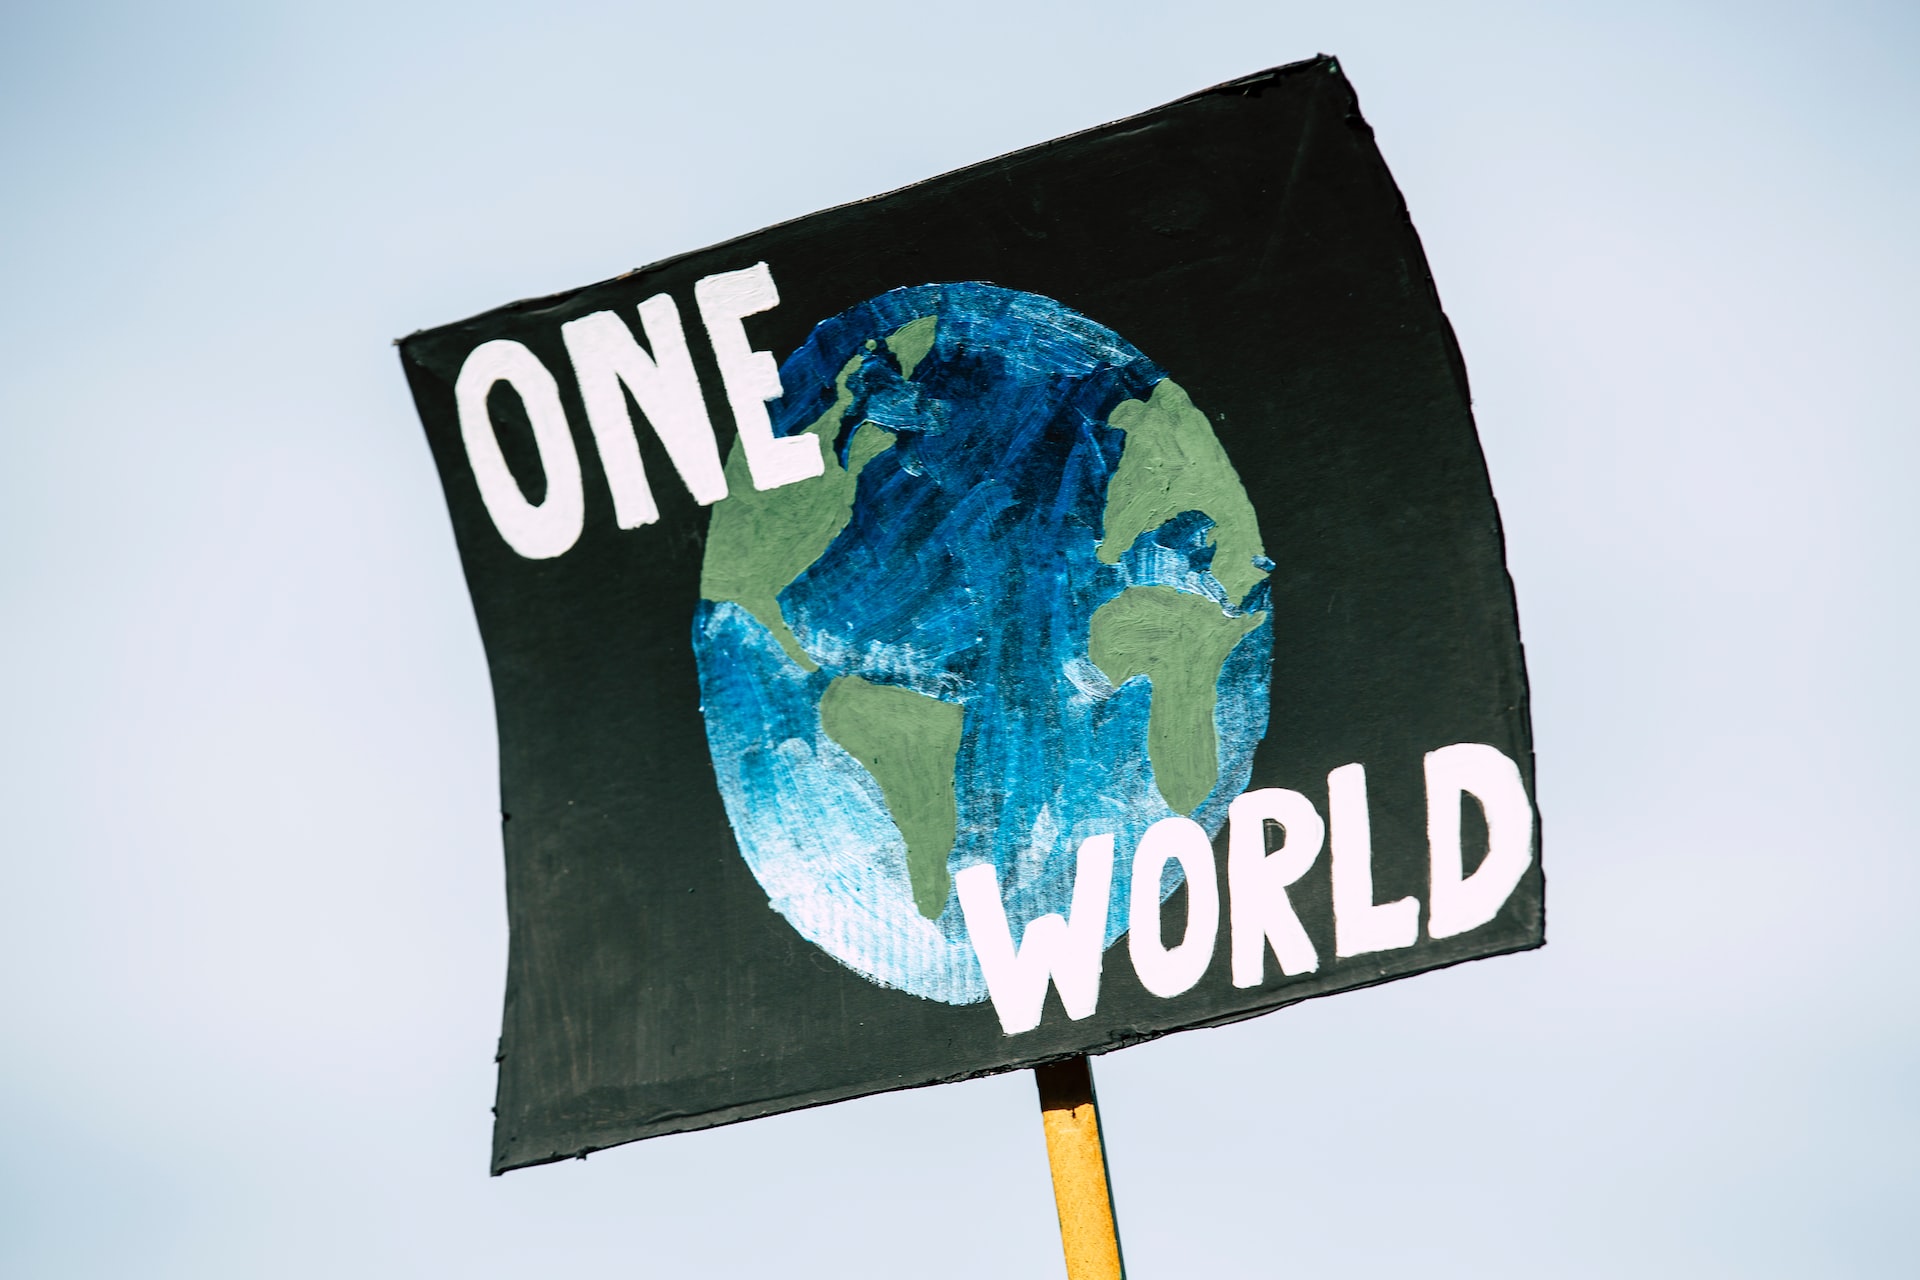 One world poster climate change protest